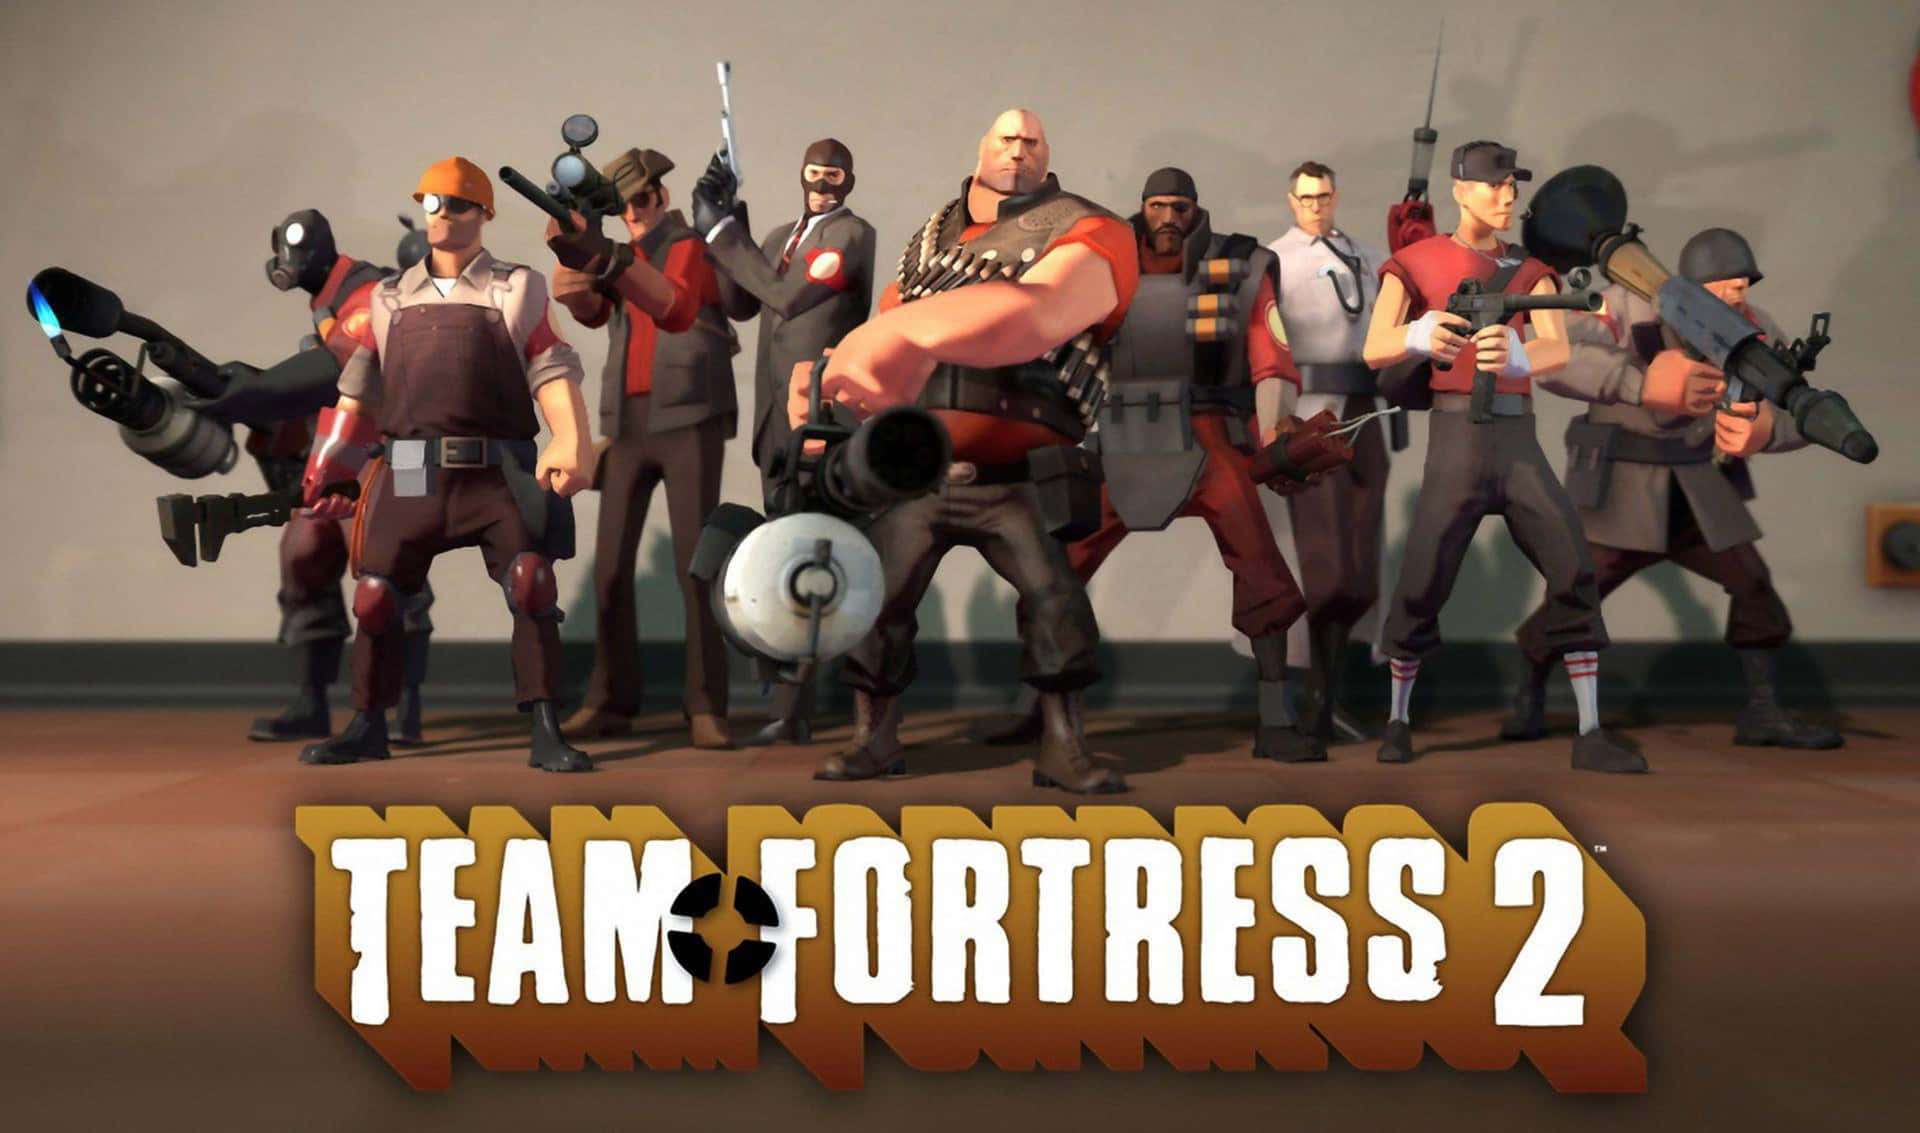 "Team Fortress 2 Action-Packed Battle Scene"